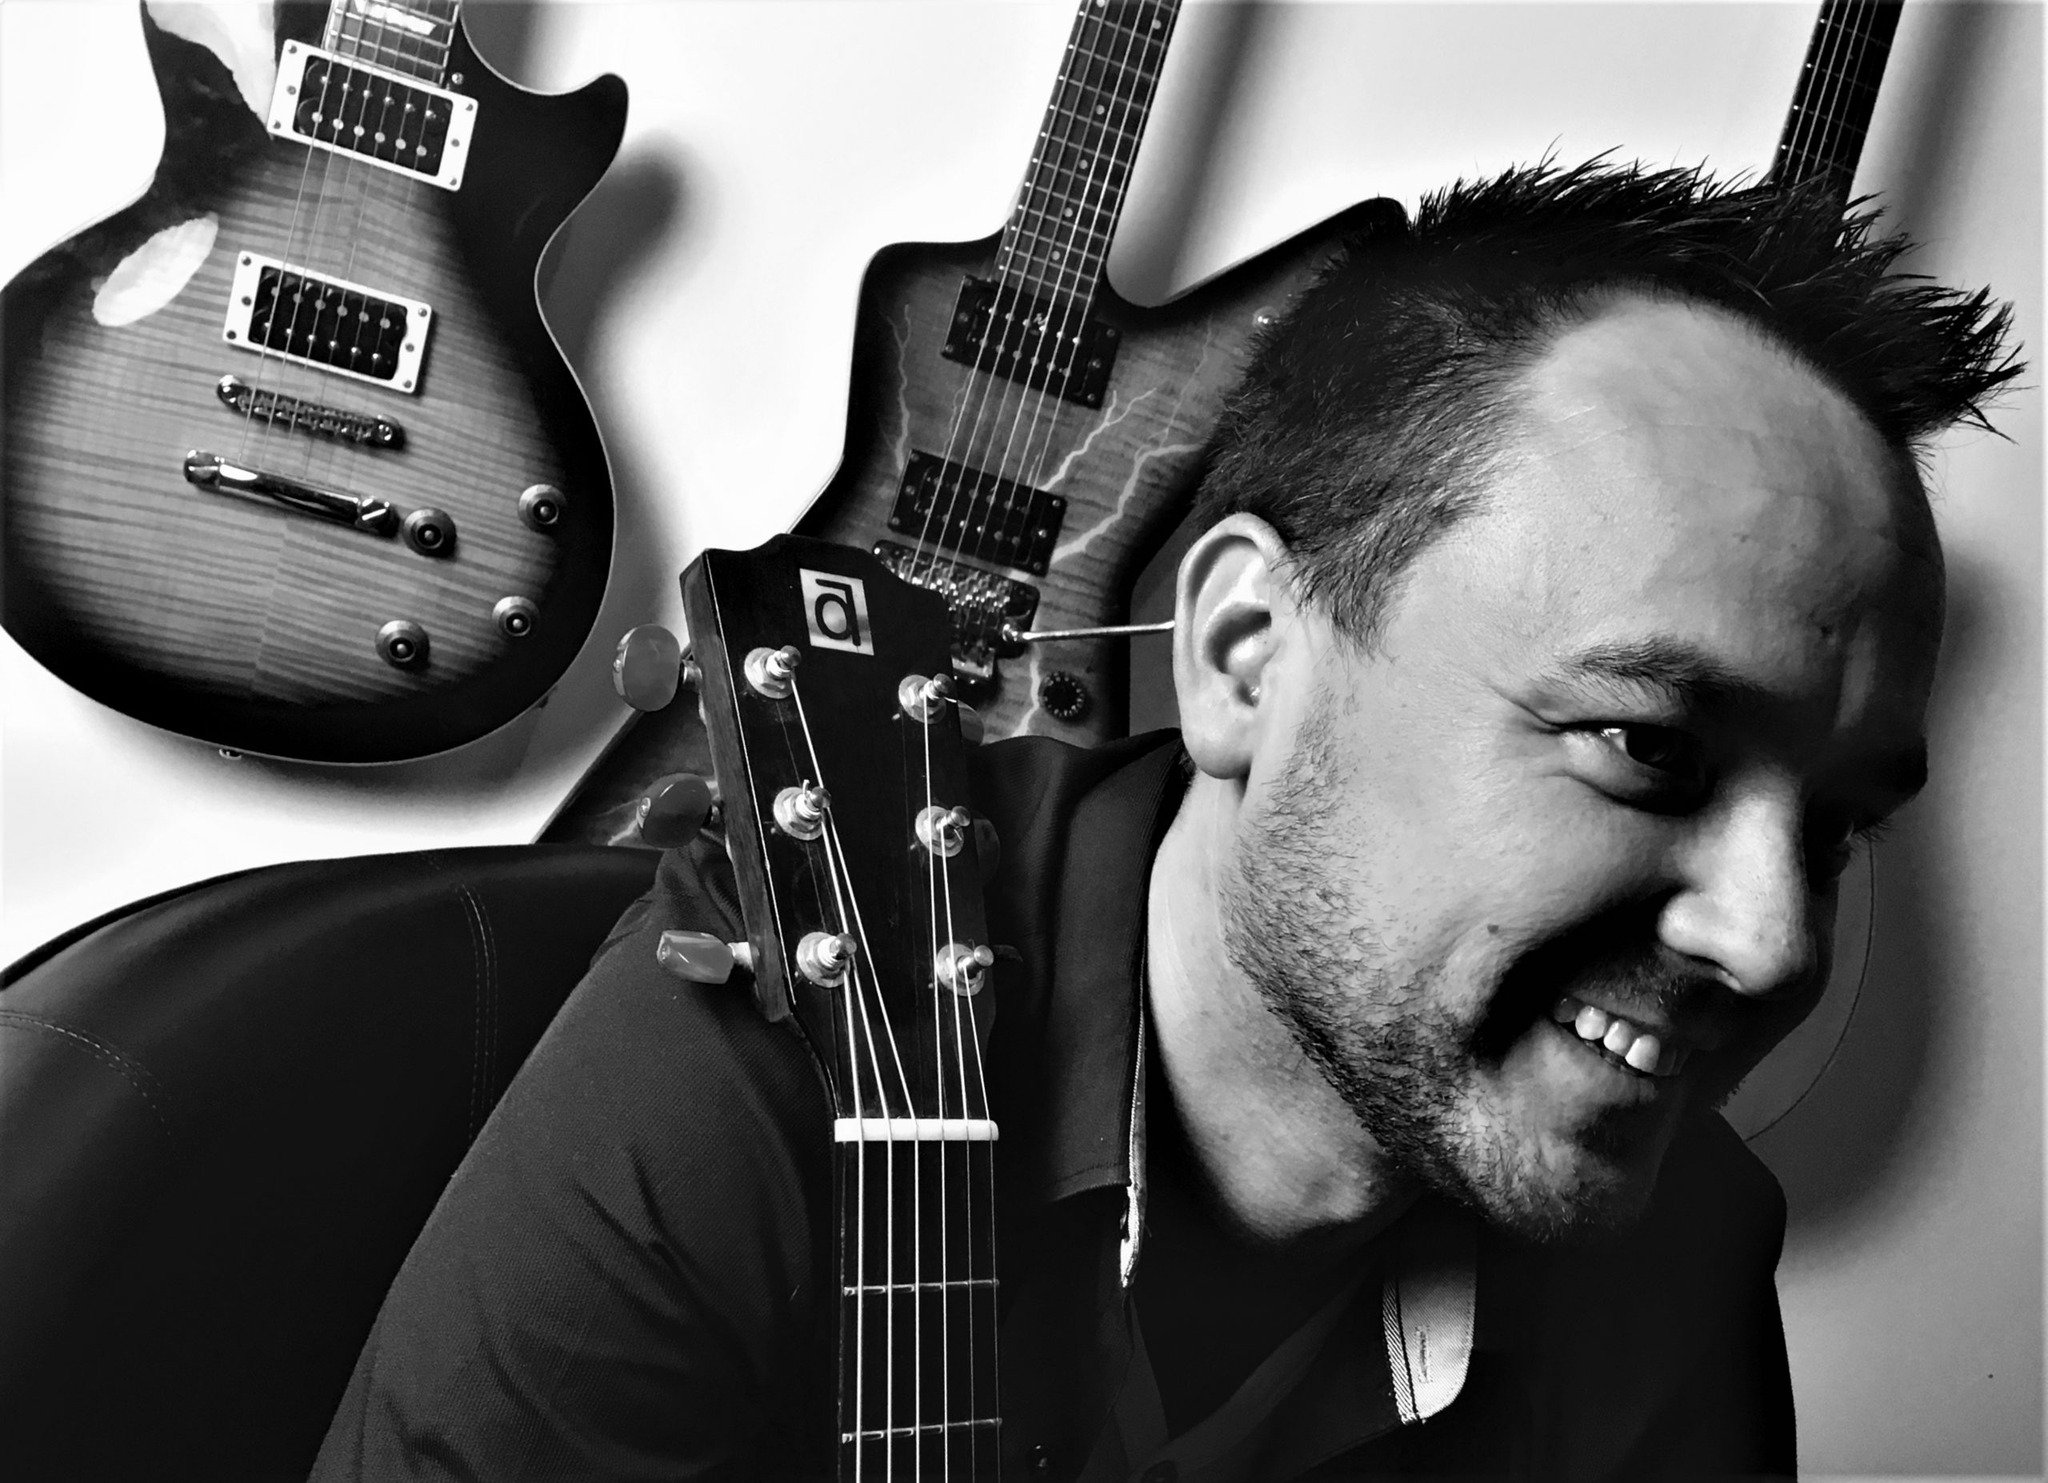 Live Music with Andy this evening in Indulge Dining 6-9pm.

Friday Night Members Special 2 Burgers &amp; 2 Drinks $30!